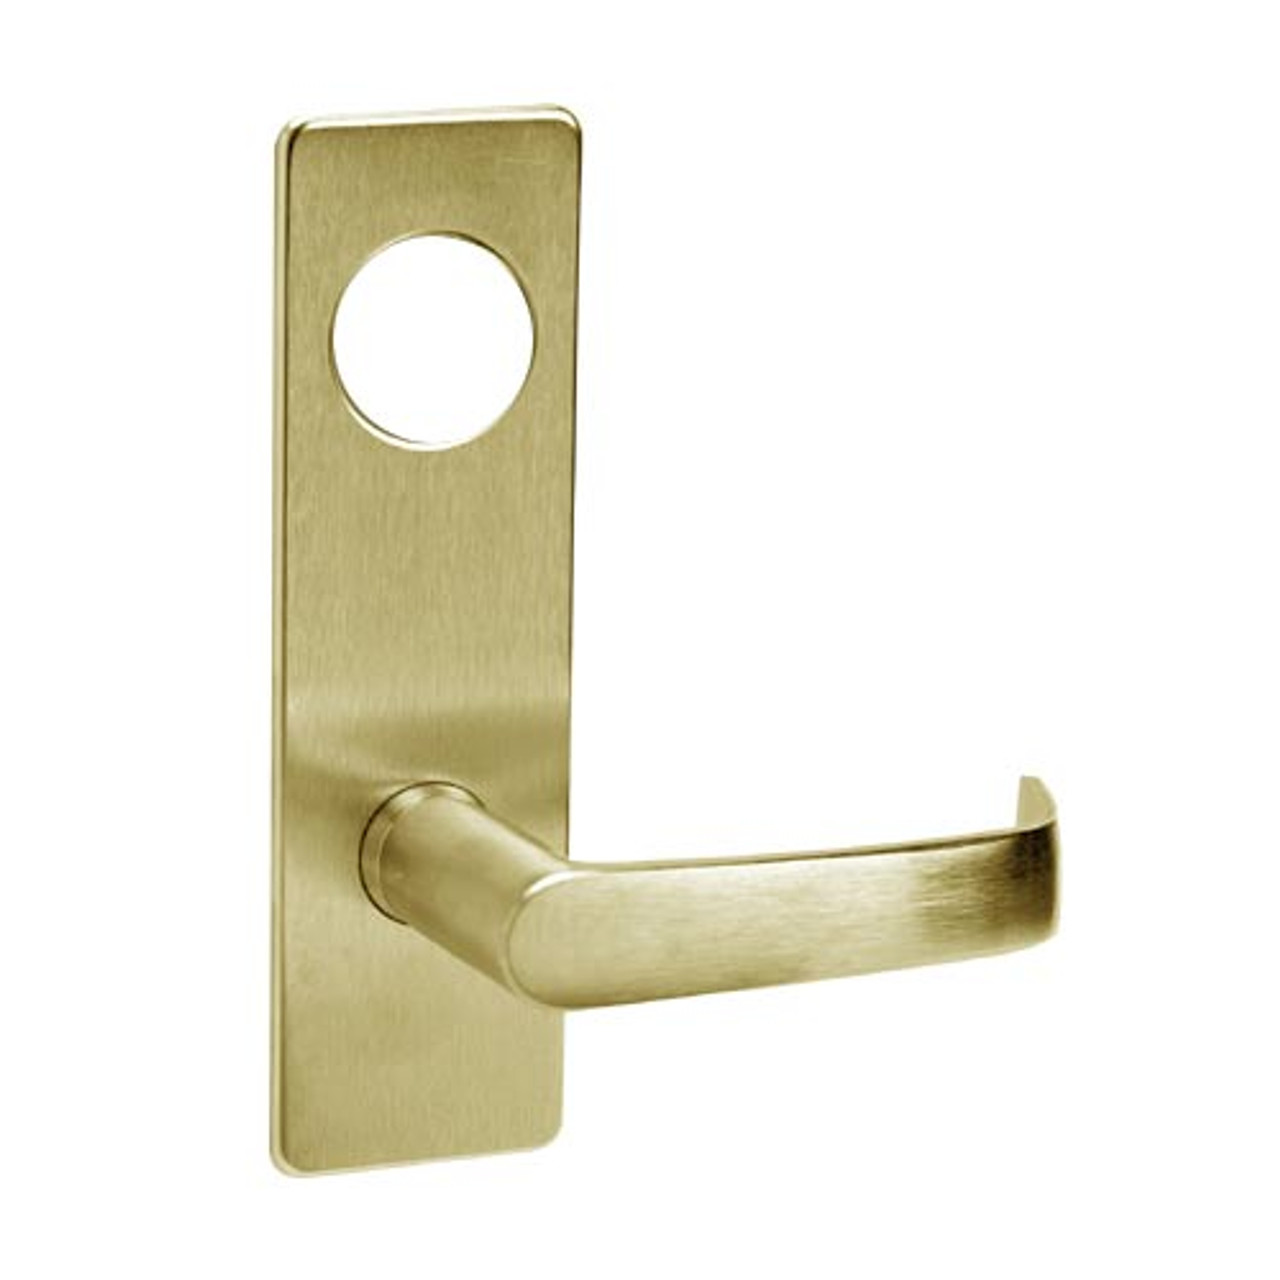 ML2042-NSP-606-LC Corbin Russwin ML2000 Series Mortise Entrance Locksets with Newport Lever in Satin Brass